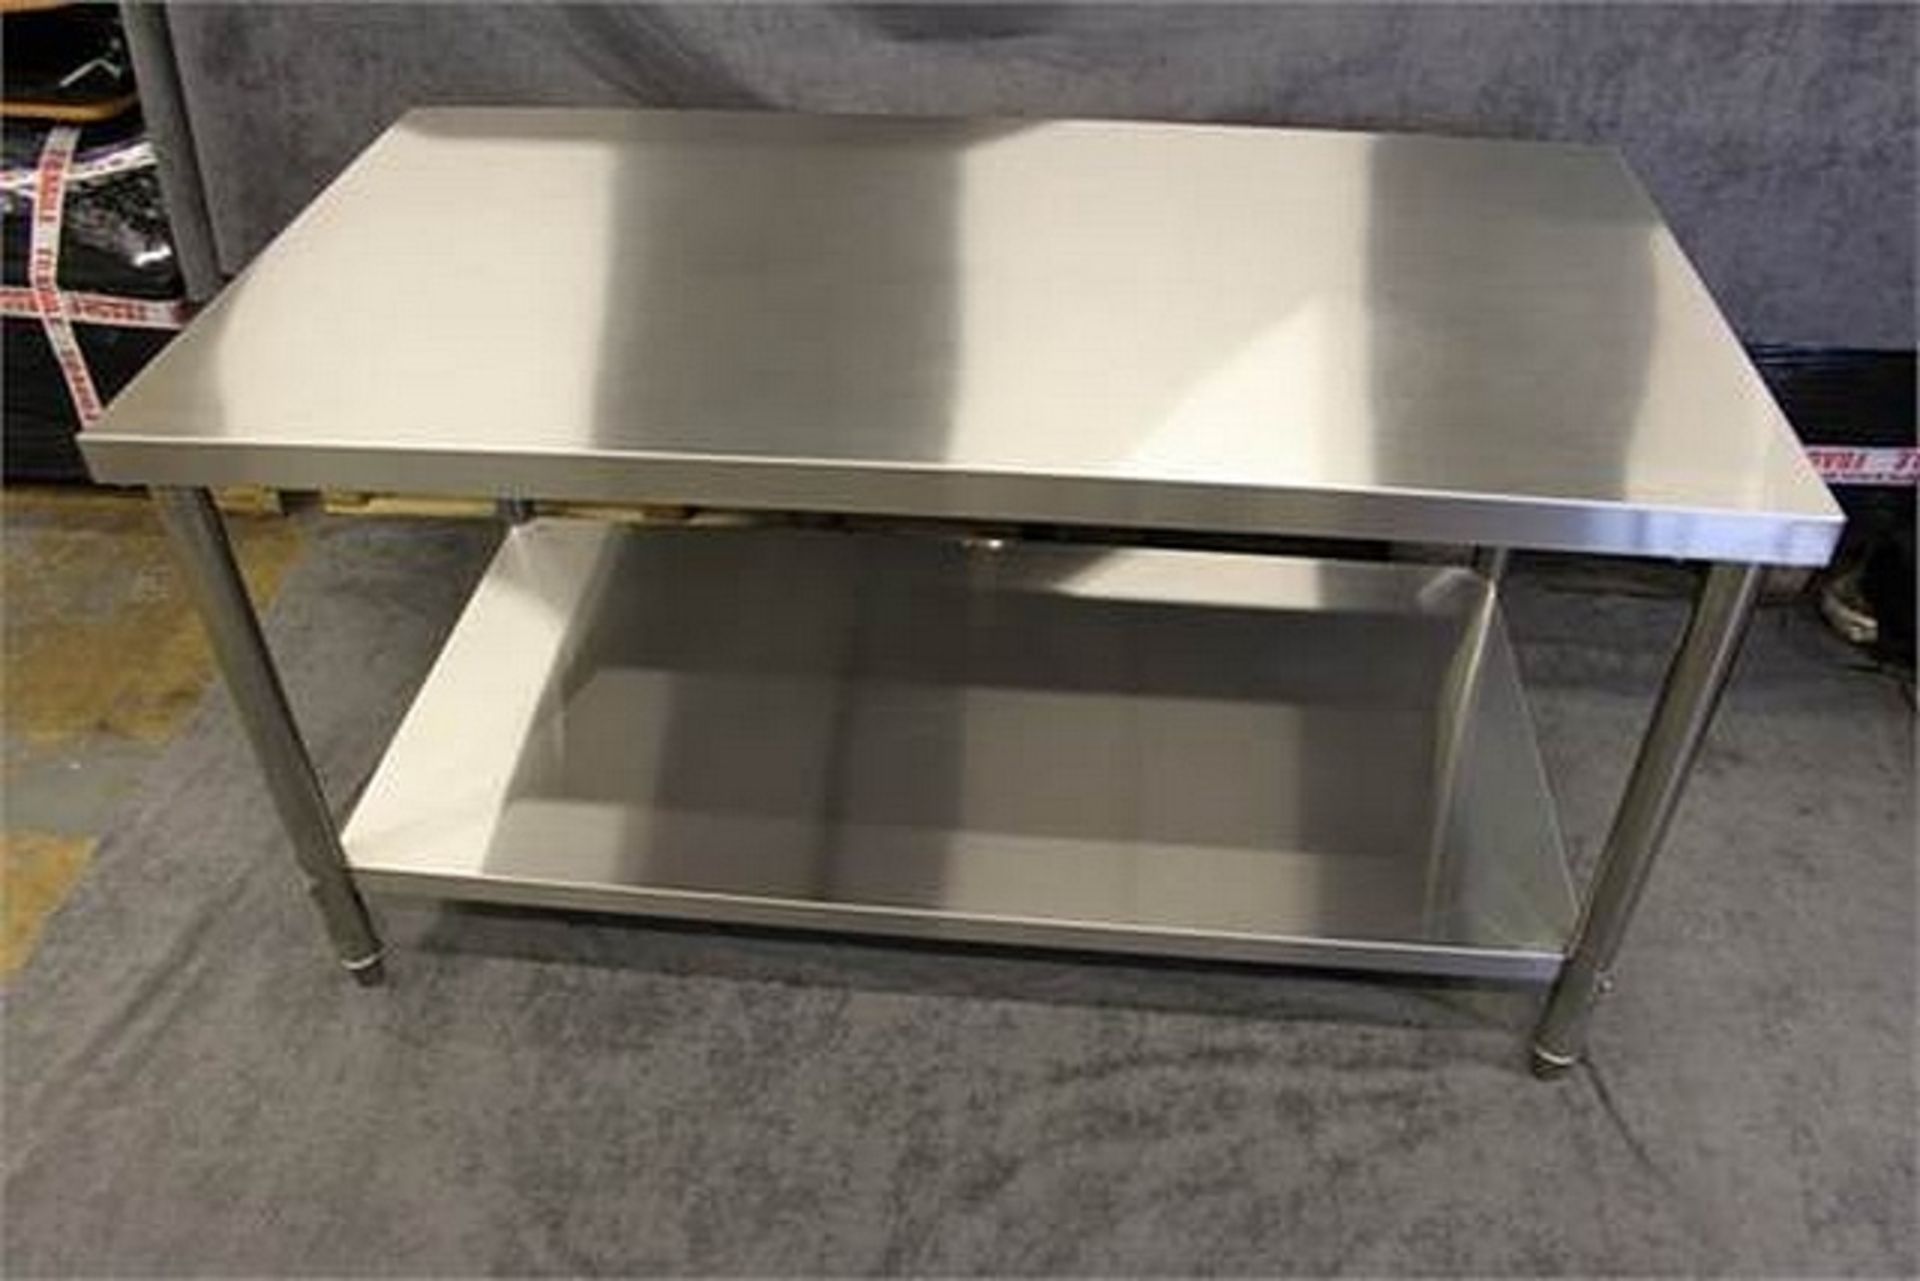 Brand New stainless steel heavy duty preparation table 1500 x 800 x 800 50mm thick top grade 304 all